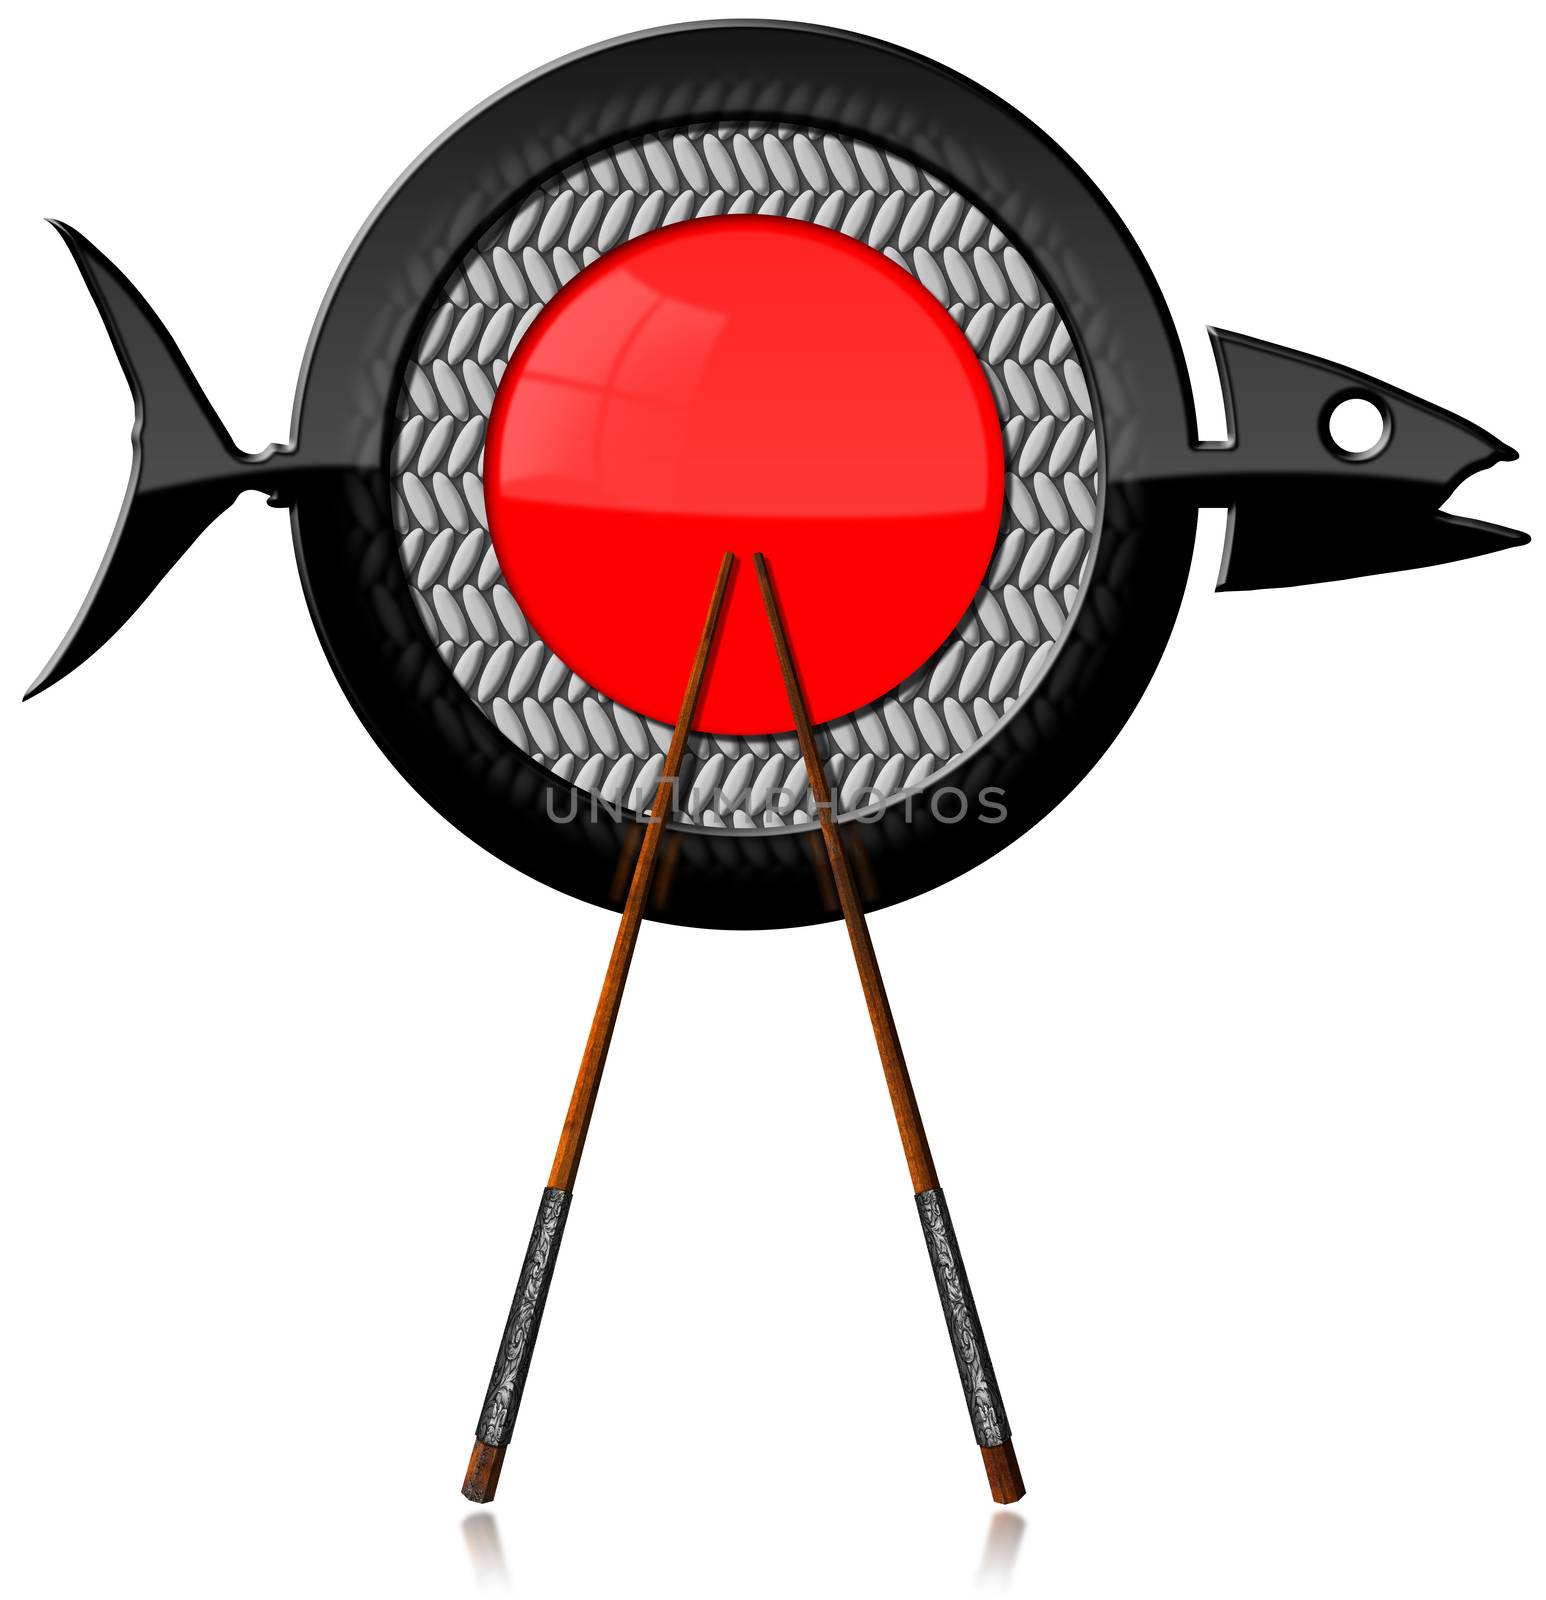 Sushi - Symbol with Fish and Chopsticks by catalby